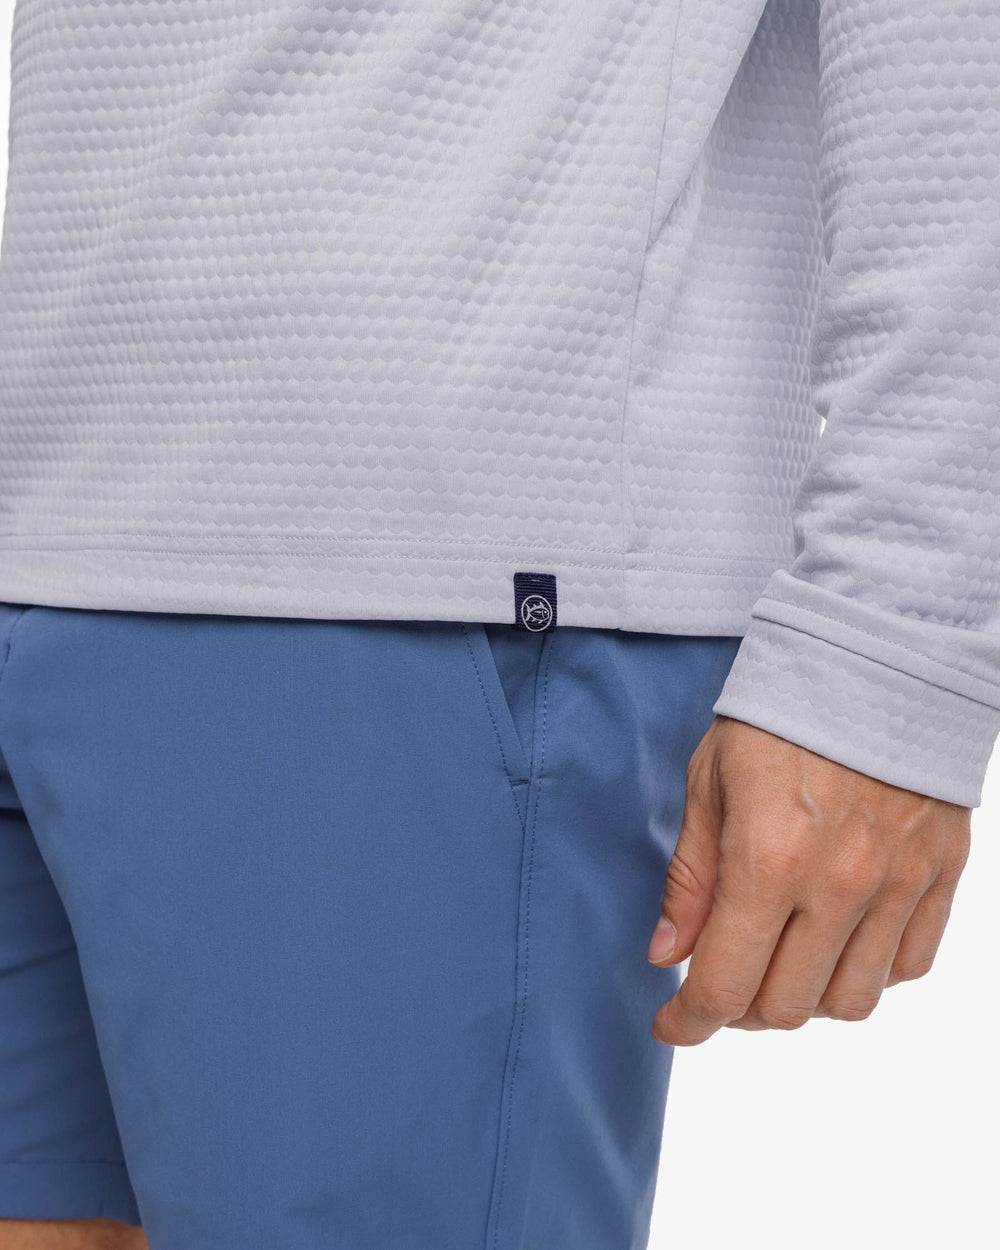 The label detail view of the Southern Tide Scuttle Heather Quarter Zip Pullover by Southern Tide - Heather Slate Grey